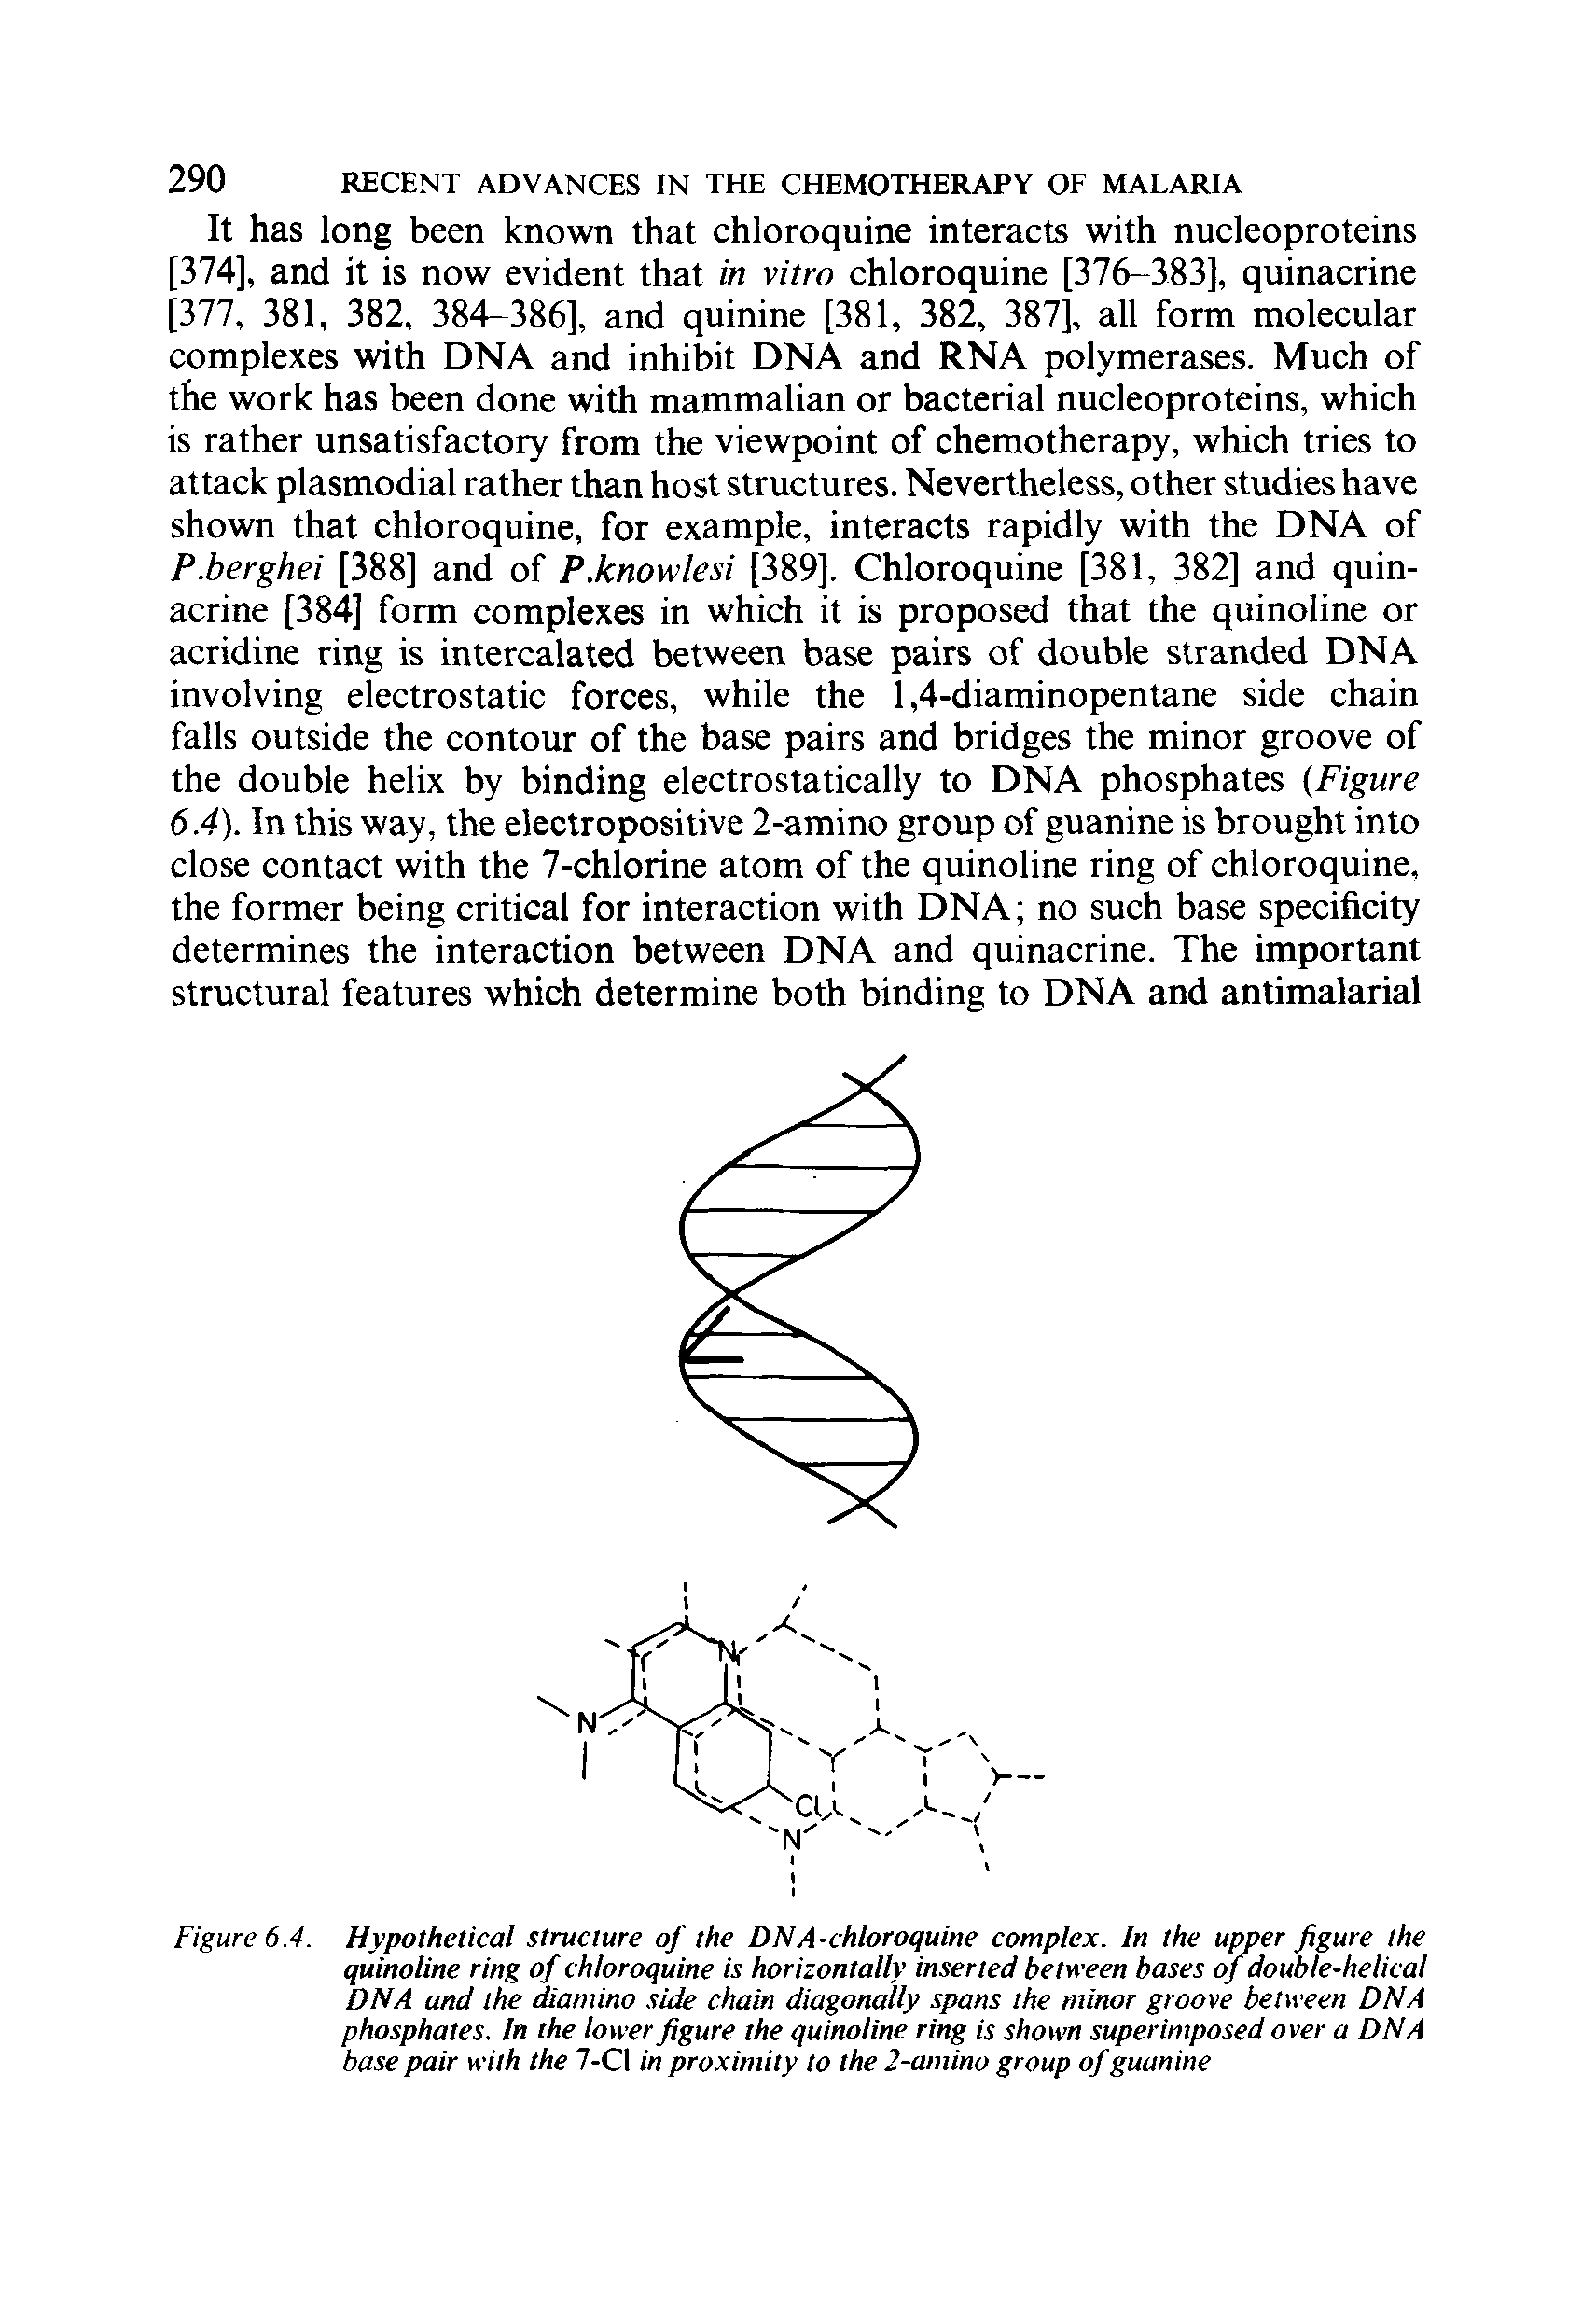 Figure 6.4. Hypothetical structure of the DNA-chloroquine complex. In the upper figure the quinoline ring of chloroquine is horizontally inserted between bases of double-helical DNA and the diamino side chain diagonally spans the minor groove between DNA phosphates. In the lower figure the quinoline ring is shown superimposed over a DNA base pair with the 7-CI in proximity to the 2-amino group of guanine...